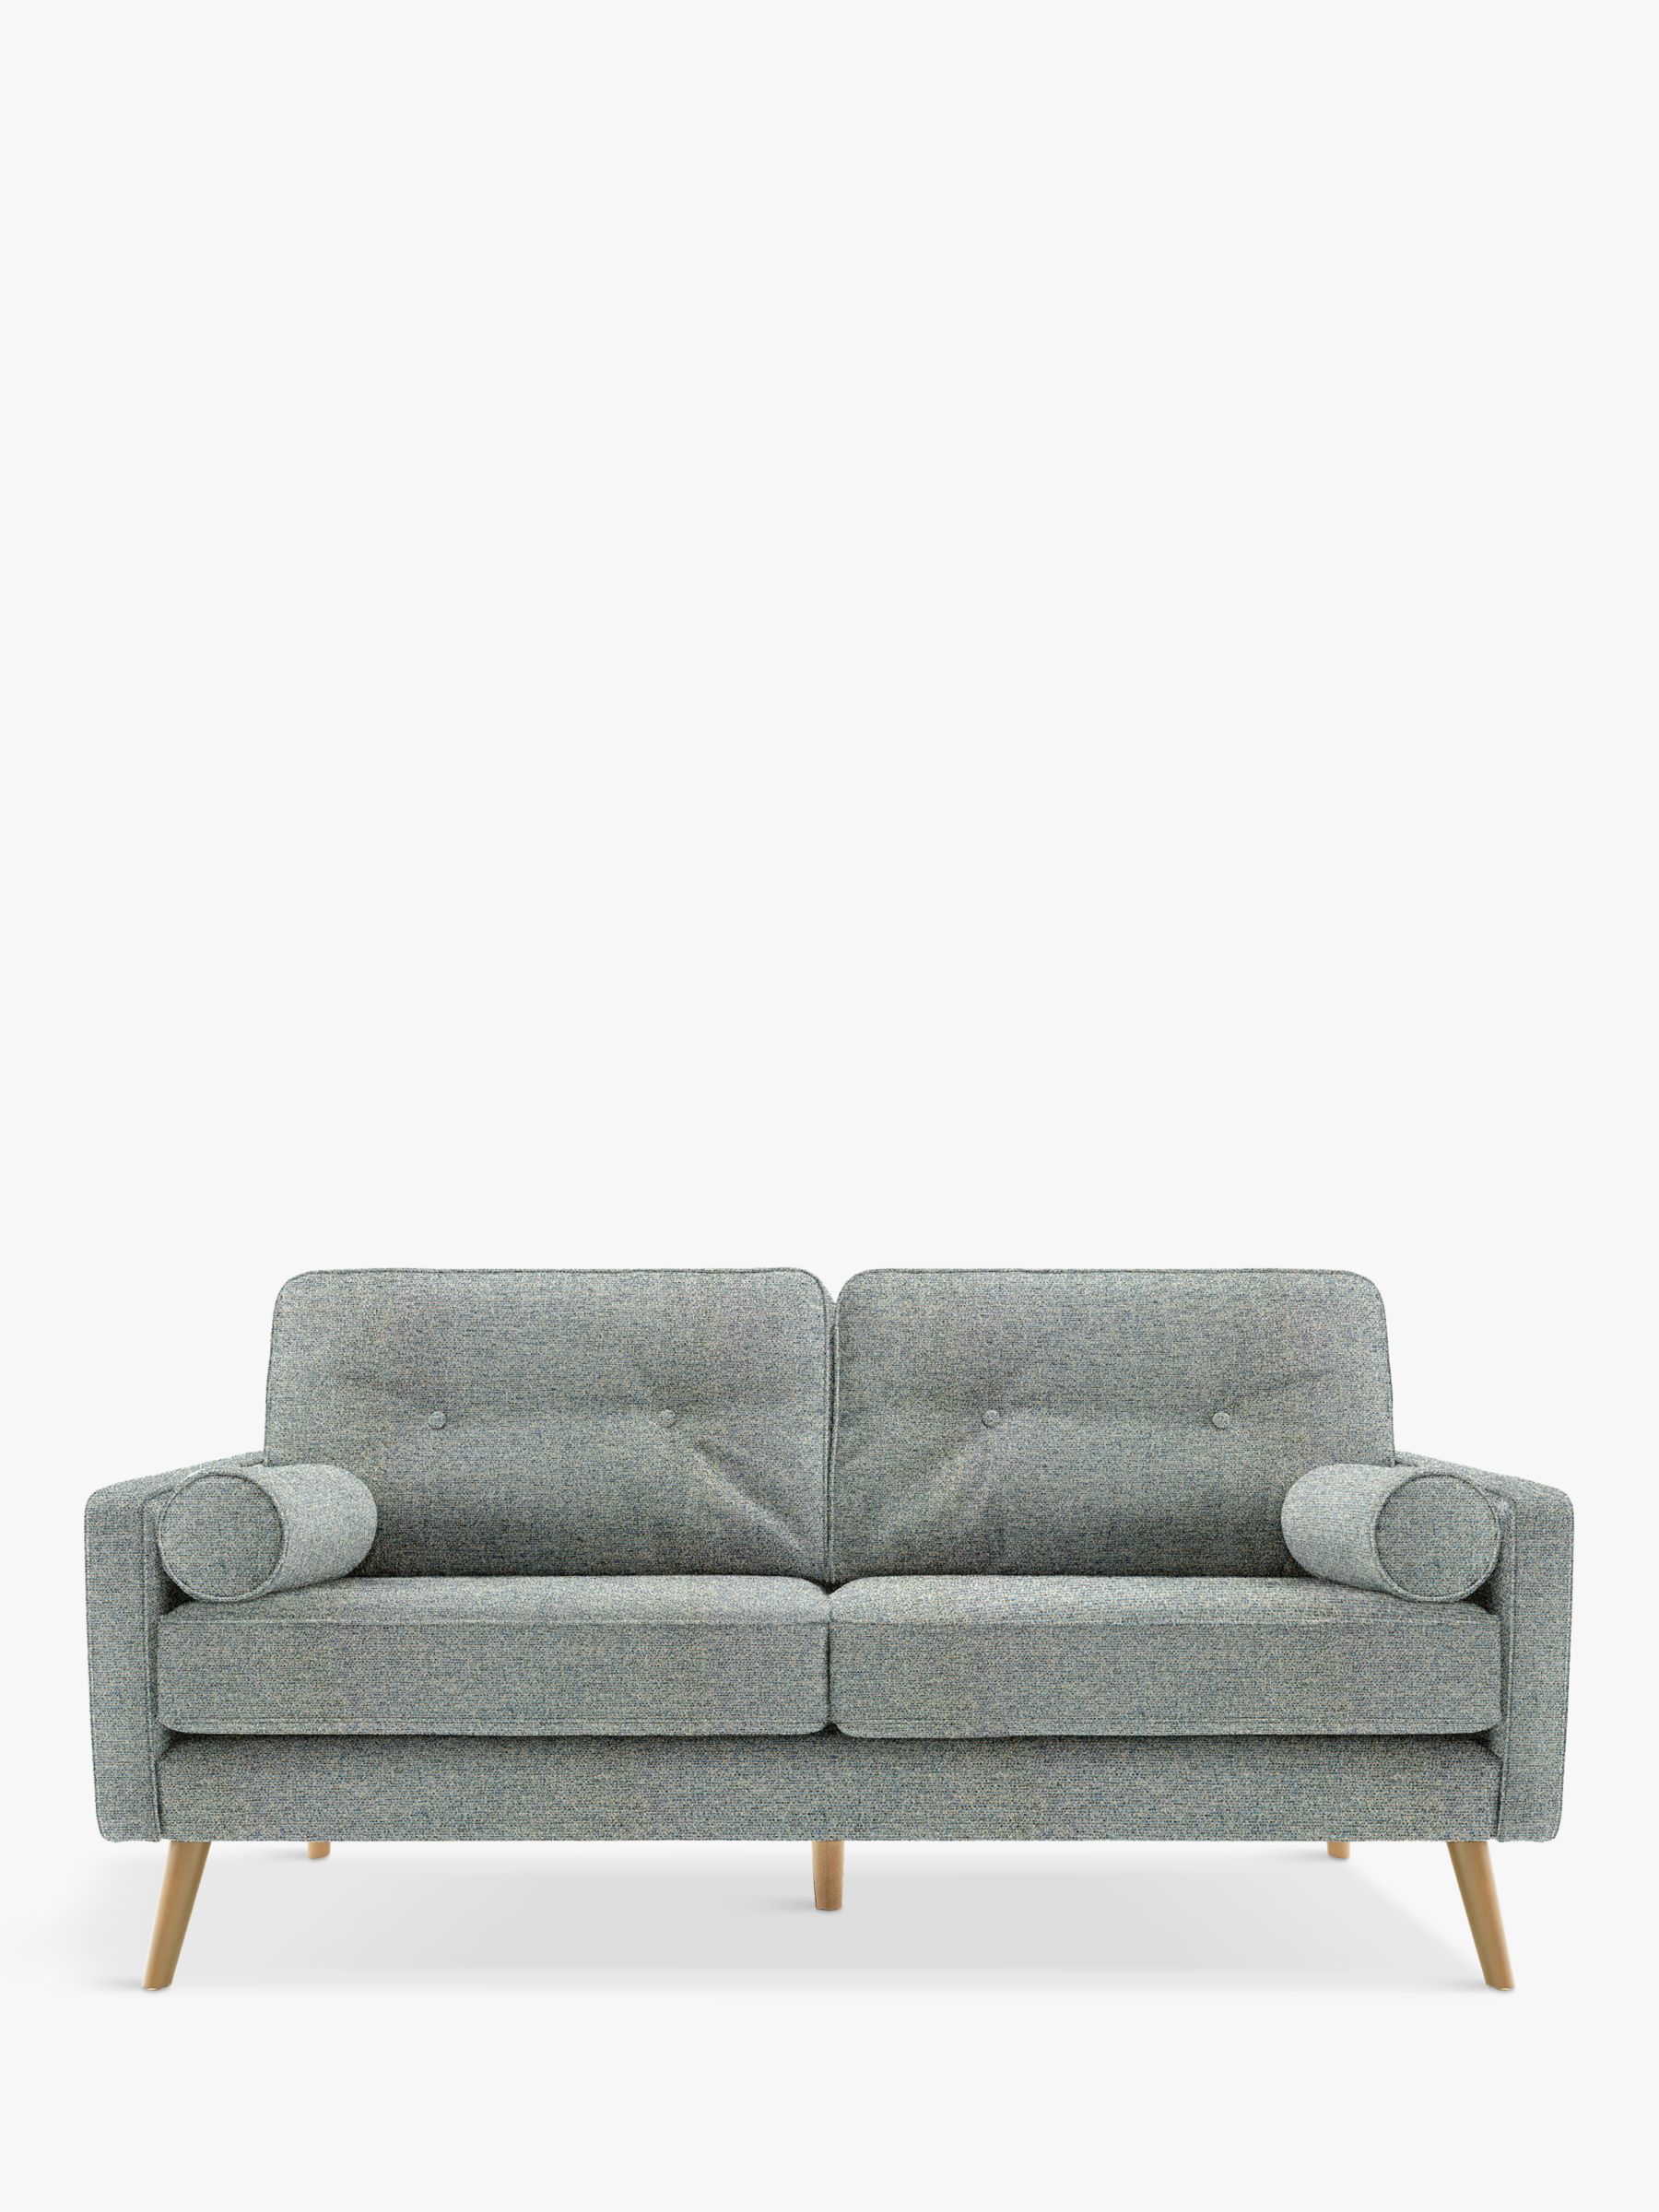 The Sixty Five Range, G Plan Vintage The Sixty Five Medium 2 Seater Sofa, Etch Ink